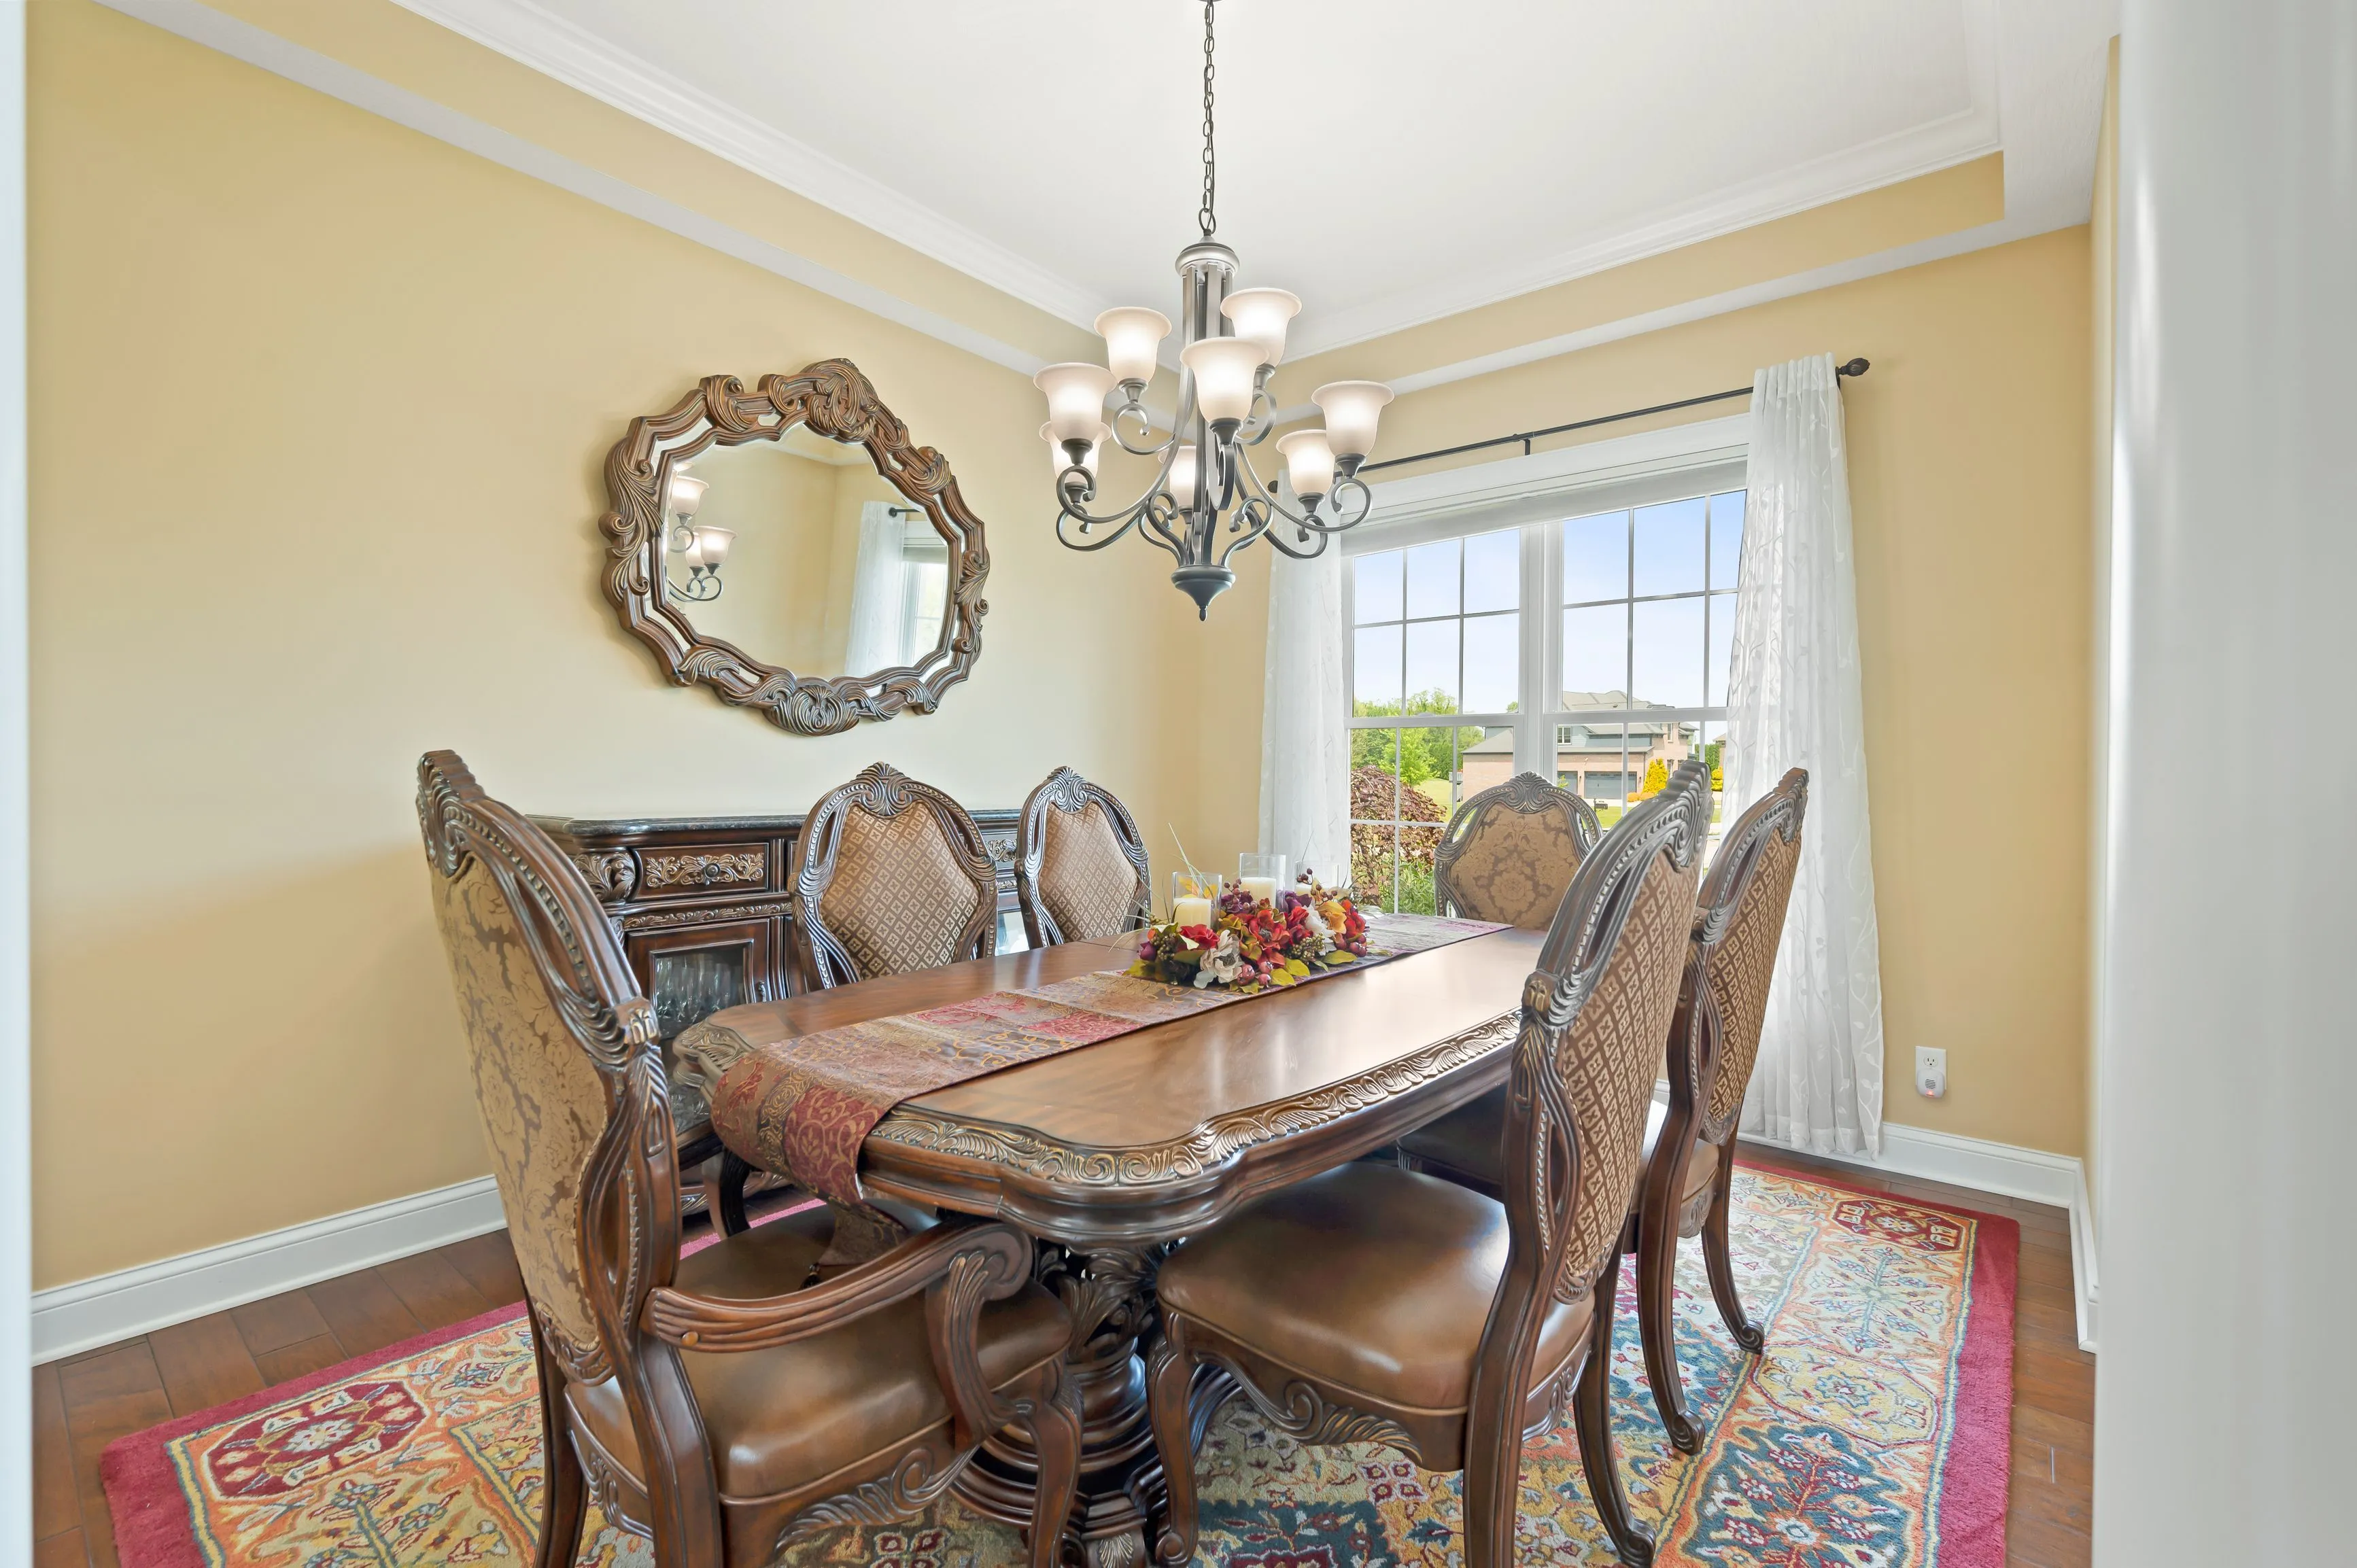 Elegant dining room with a polished wooden table, ornate chairs, and a decorative mirror on the wall, bathed in natural light from a window with sheer curtains.